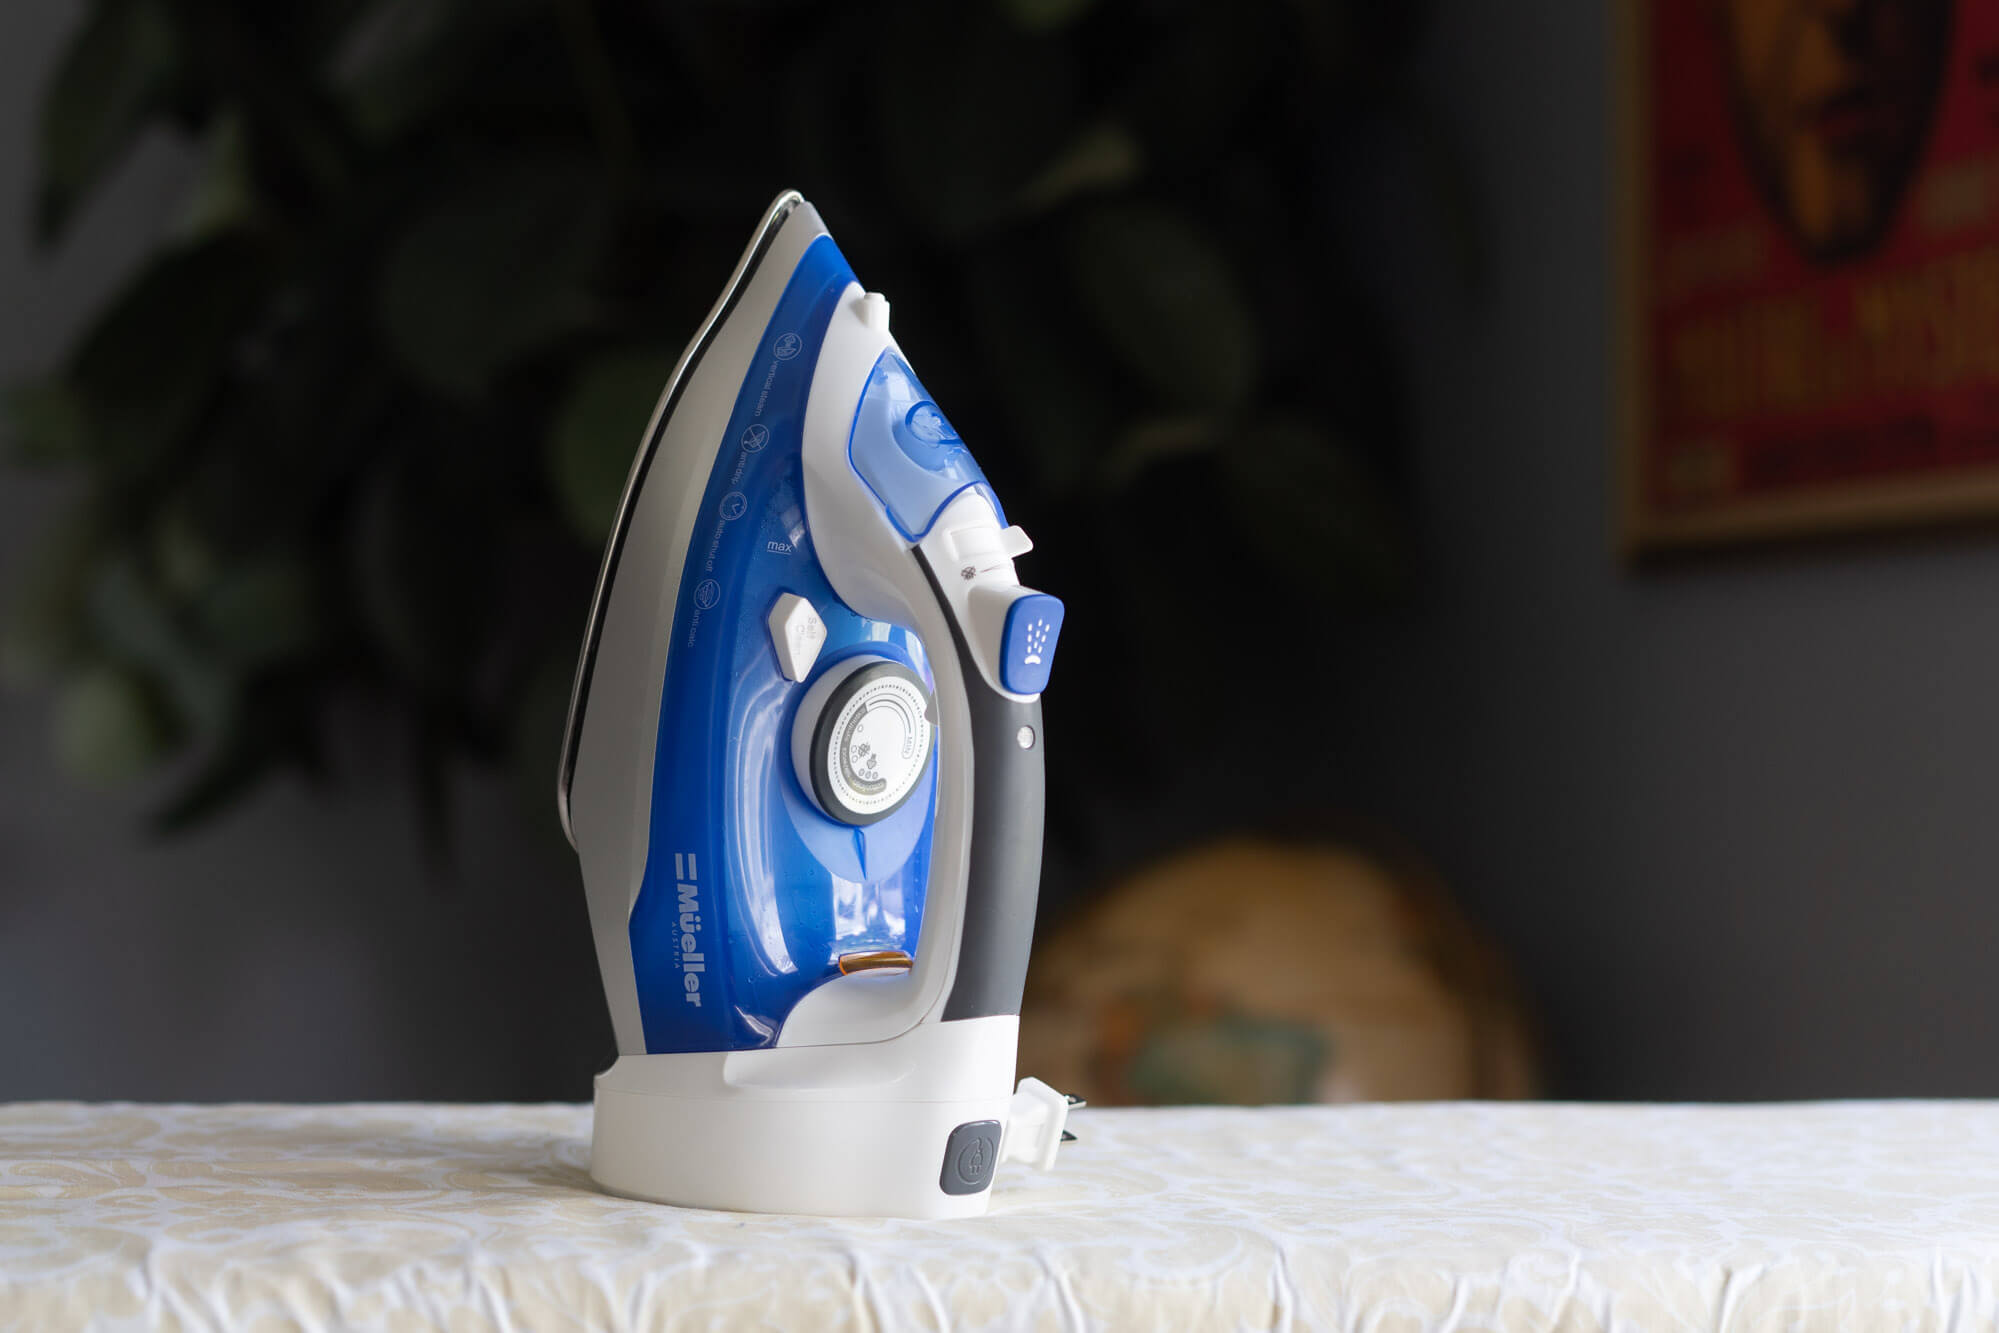 The 8 Best Steam Irons Keyword, Tested and Reviewed